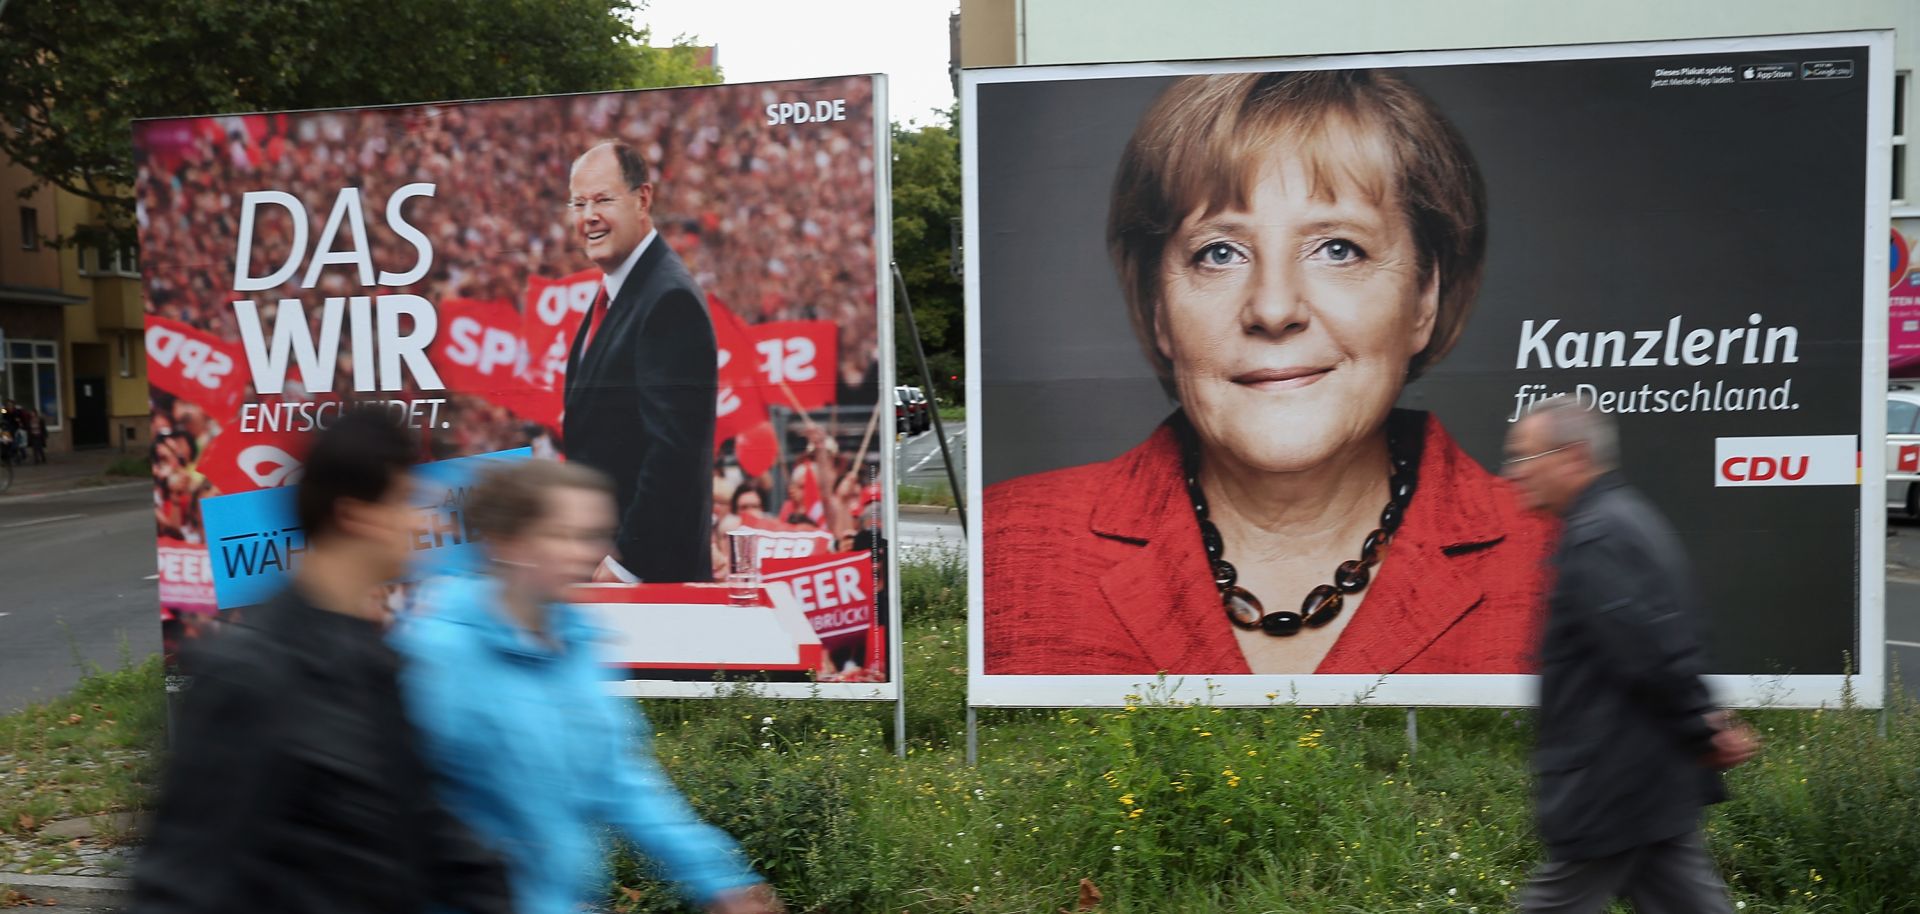 People walk past election campaign posters featuring Germany's Christian Democratic Union (CDU) Angela Merkel (R) and Social Democratic Party (SPD).